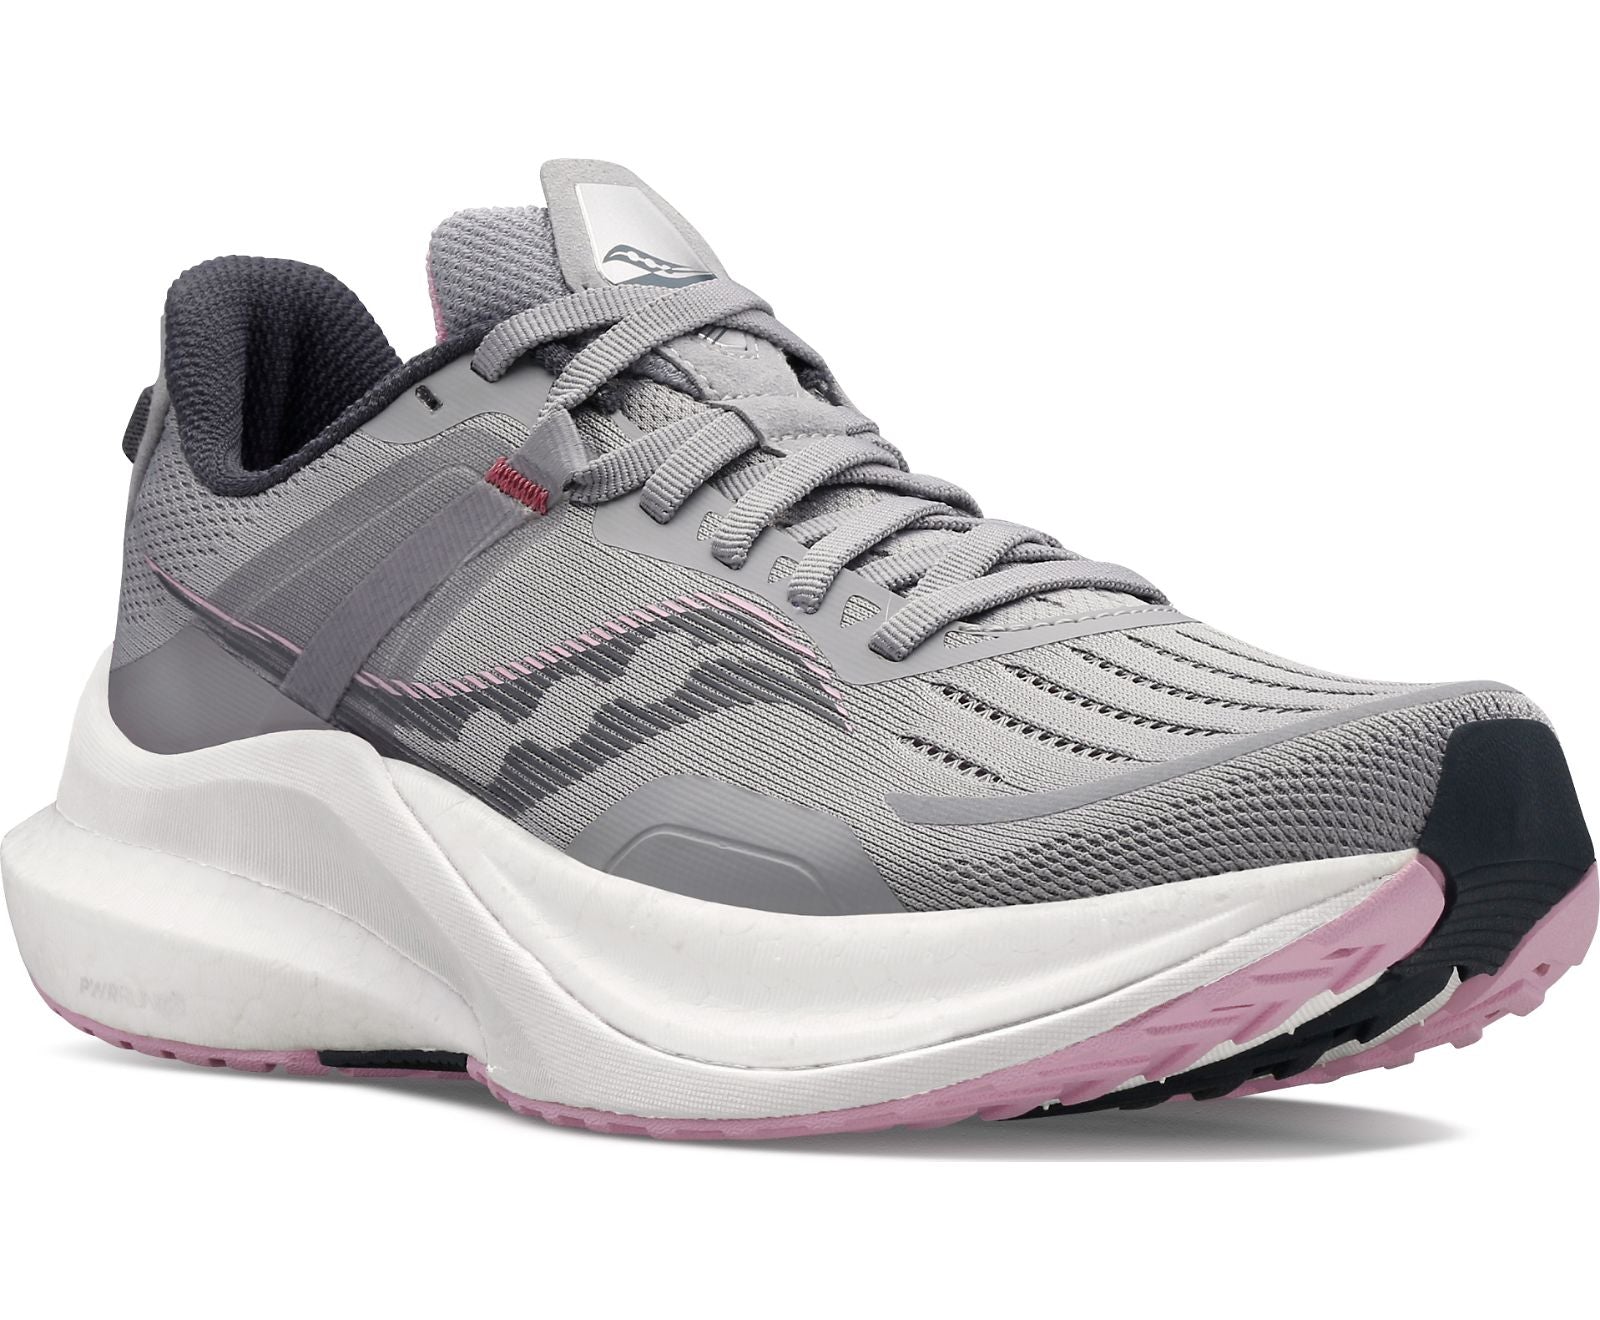 Front angle view of the Women's Tempus in the wide "D" width by Saucony in the color Alloy/Quartz